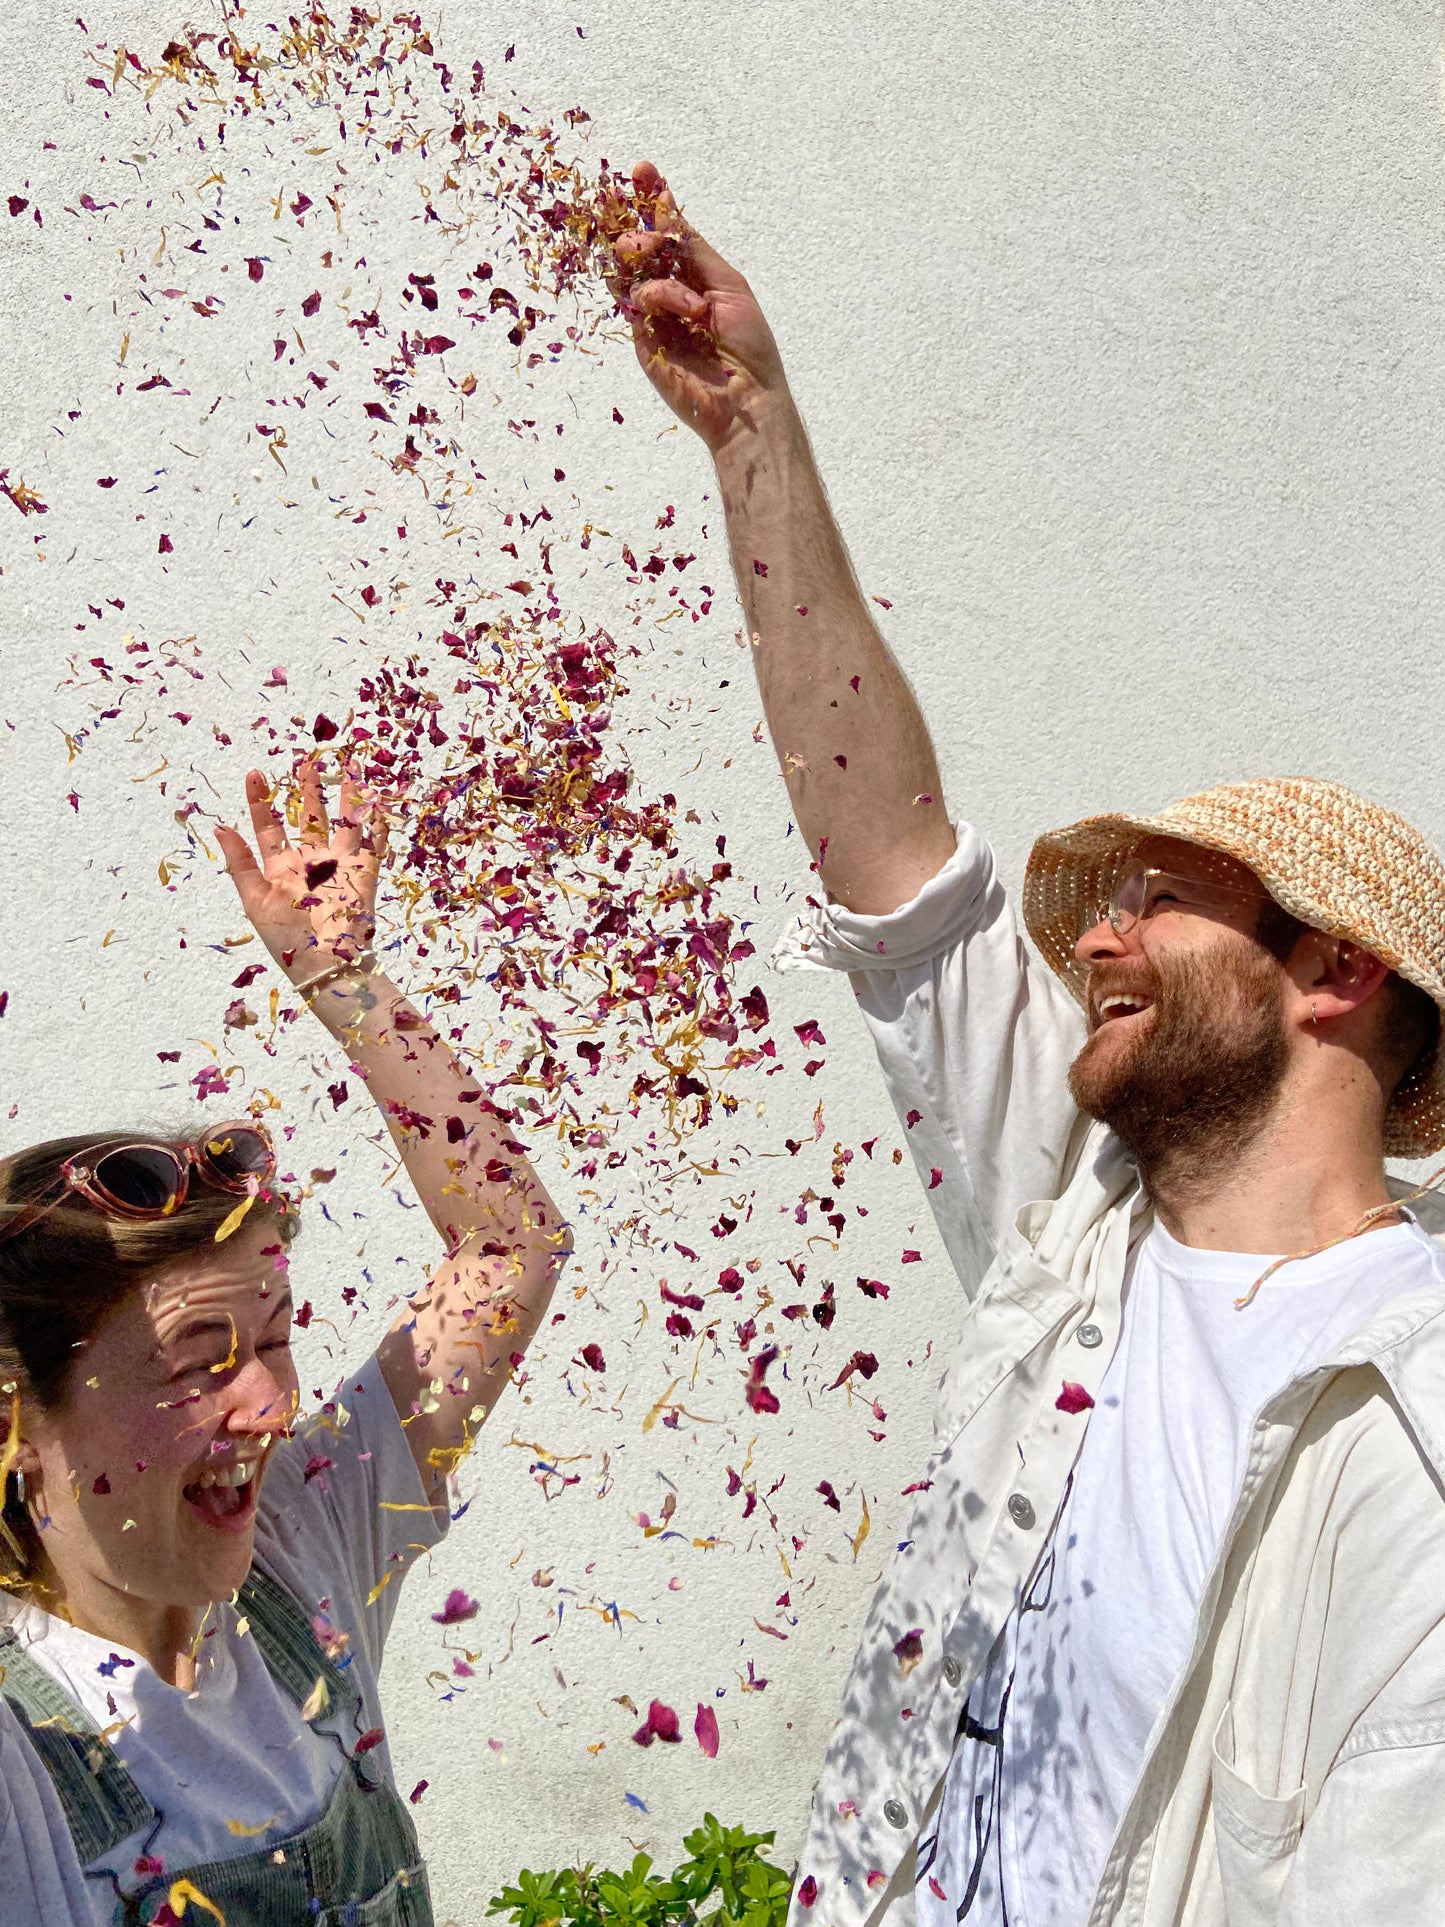 Eco dried flower confetti being thrown for wedding styling photo. The petals are colourful and beautiful and plastic free.